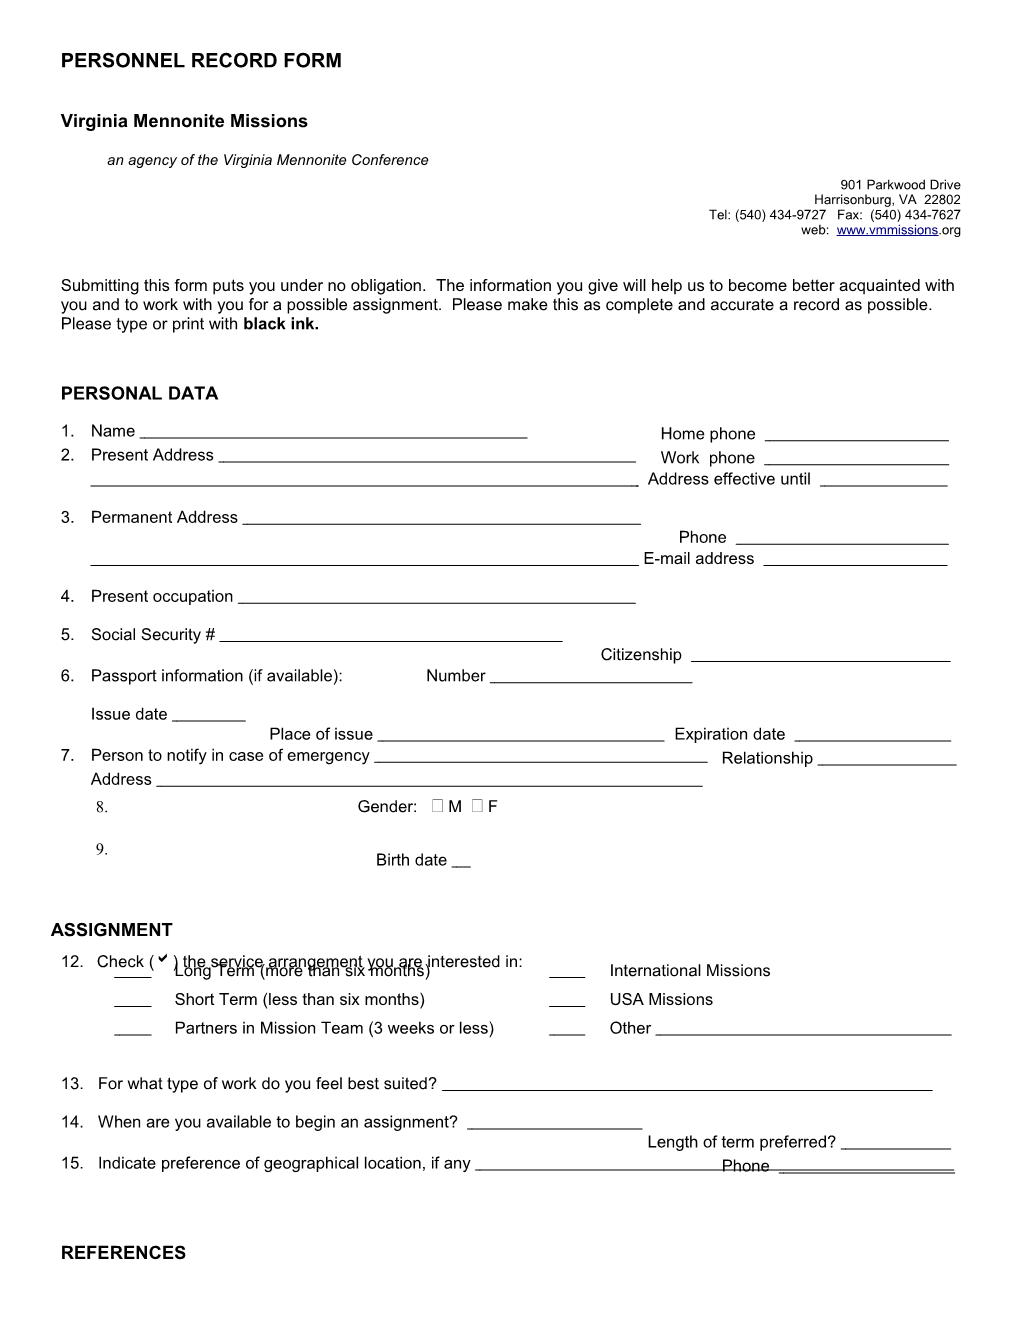 Submitting This Form Puts You Under Noobligation. the Information You Give Will Help Us